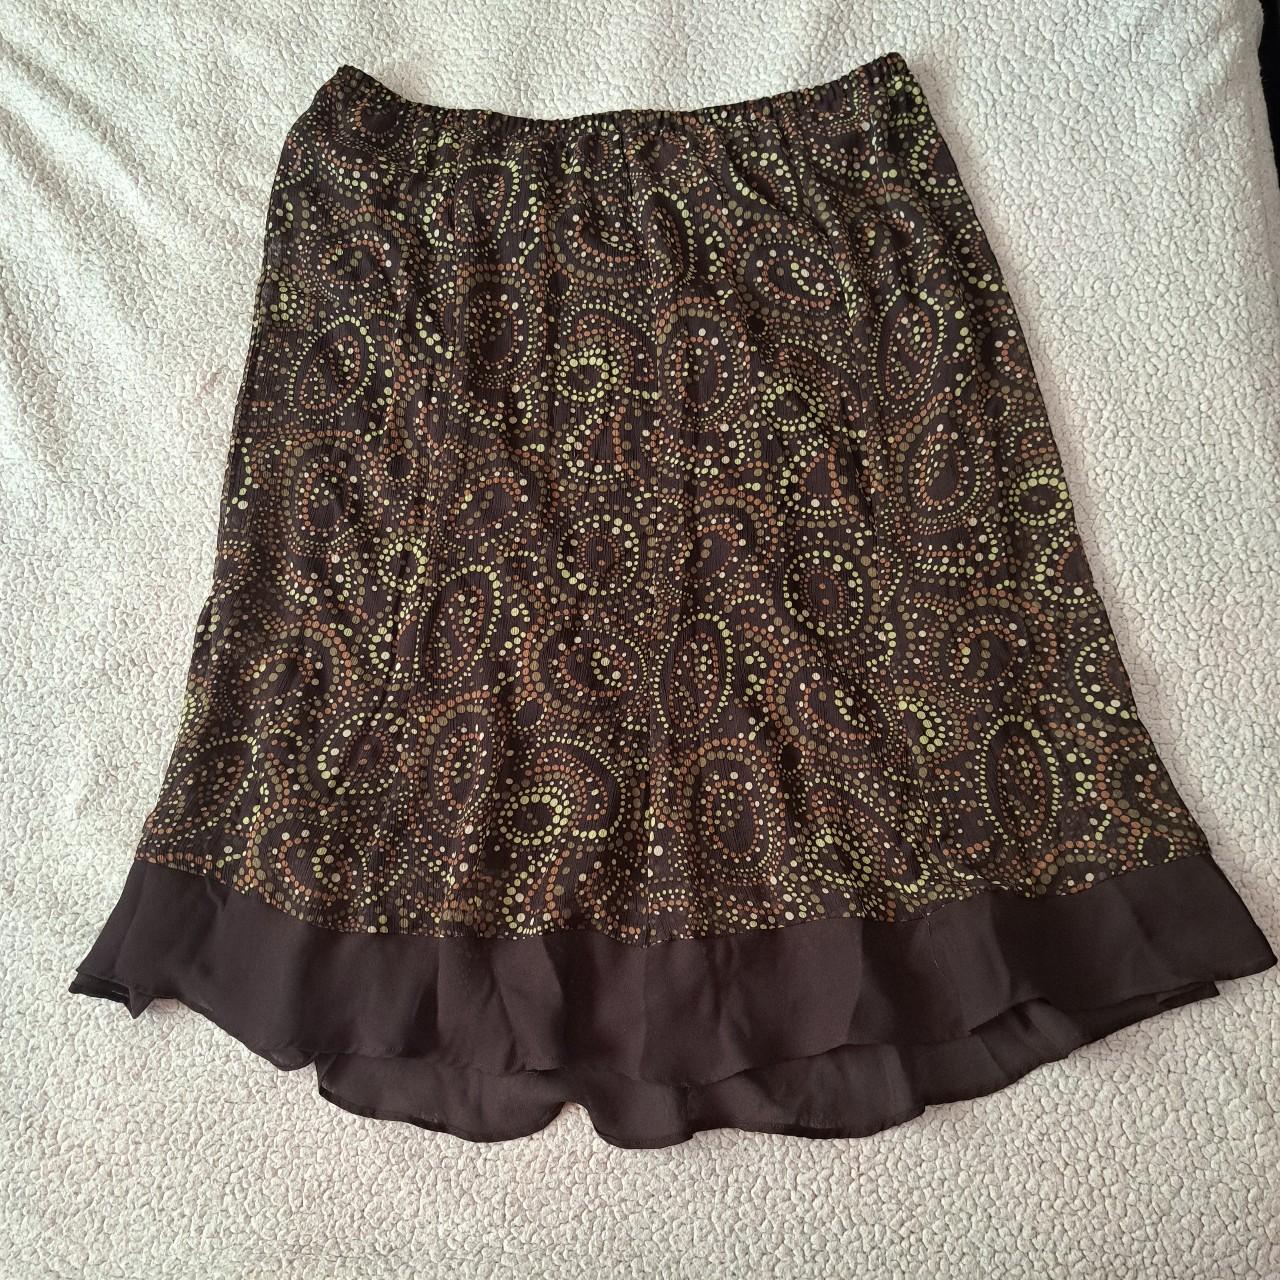 Brown & Green Midi Skirt 💎 - Olive and earthy... - Depop